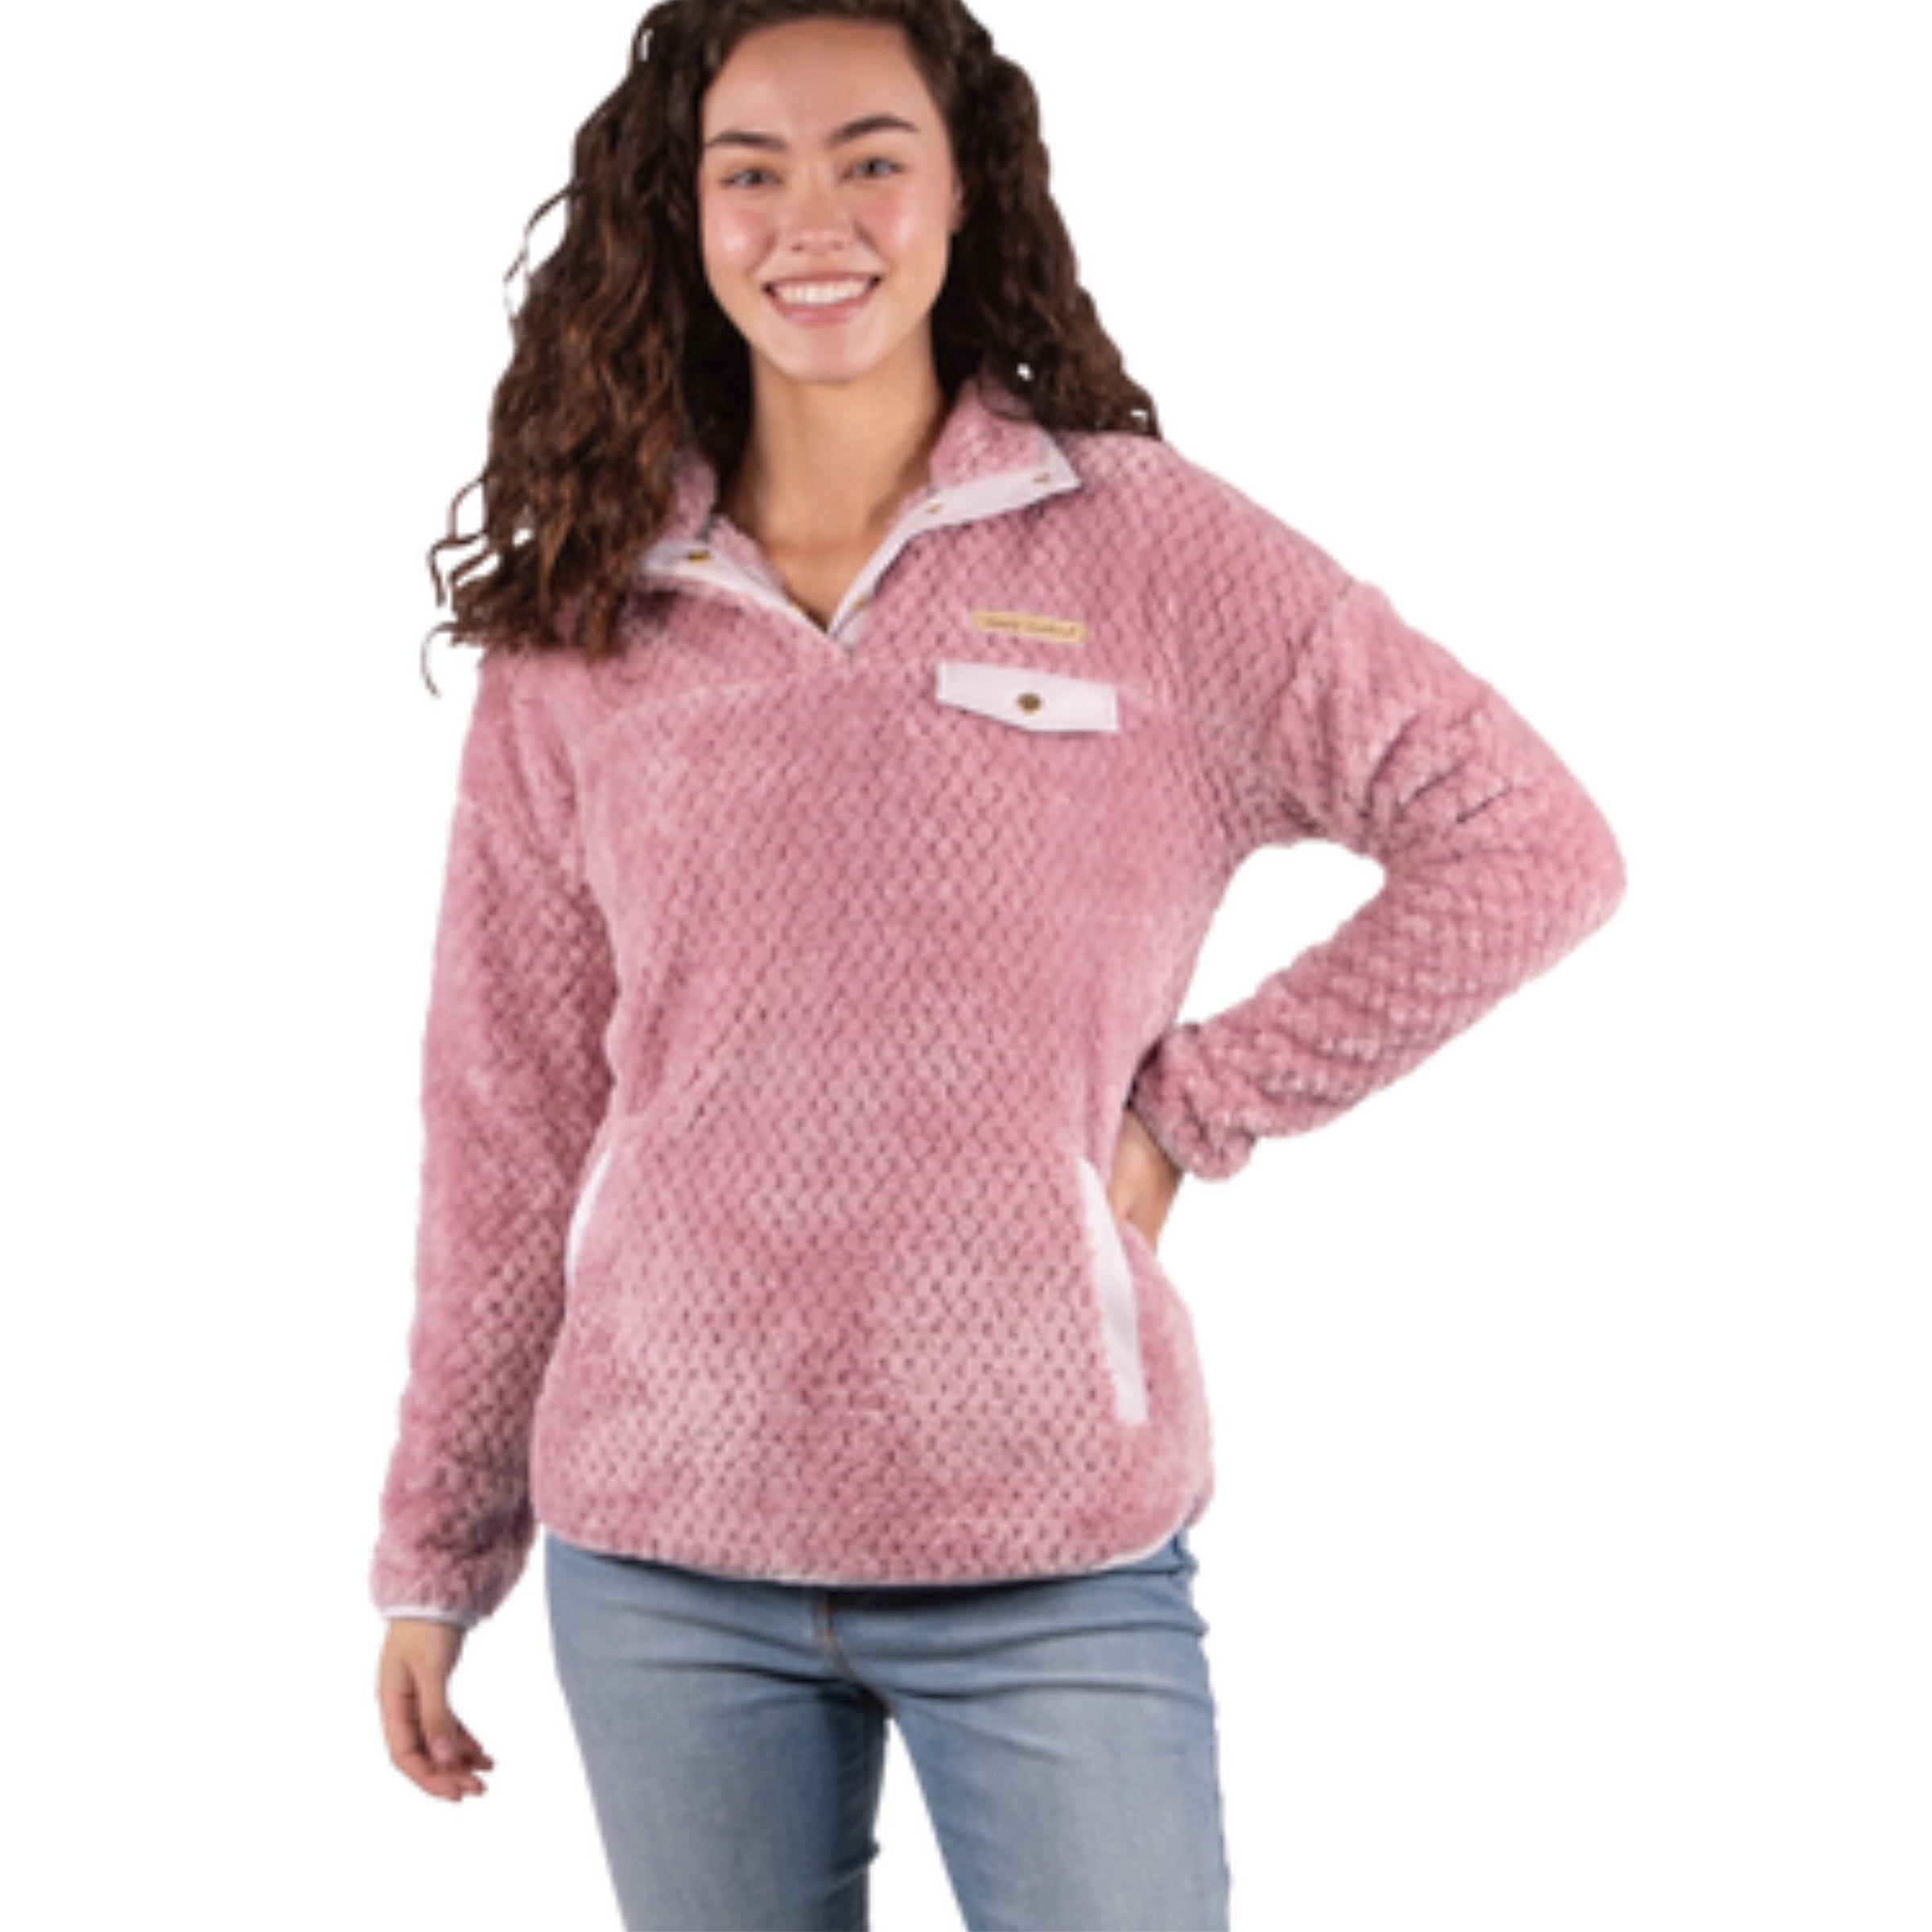 Sale Simply Southern Preppy Christmas Turtle Pink Long Sleeve T-Shirt Youth Medium / Pink